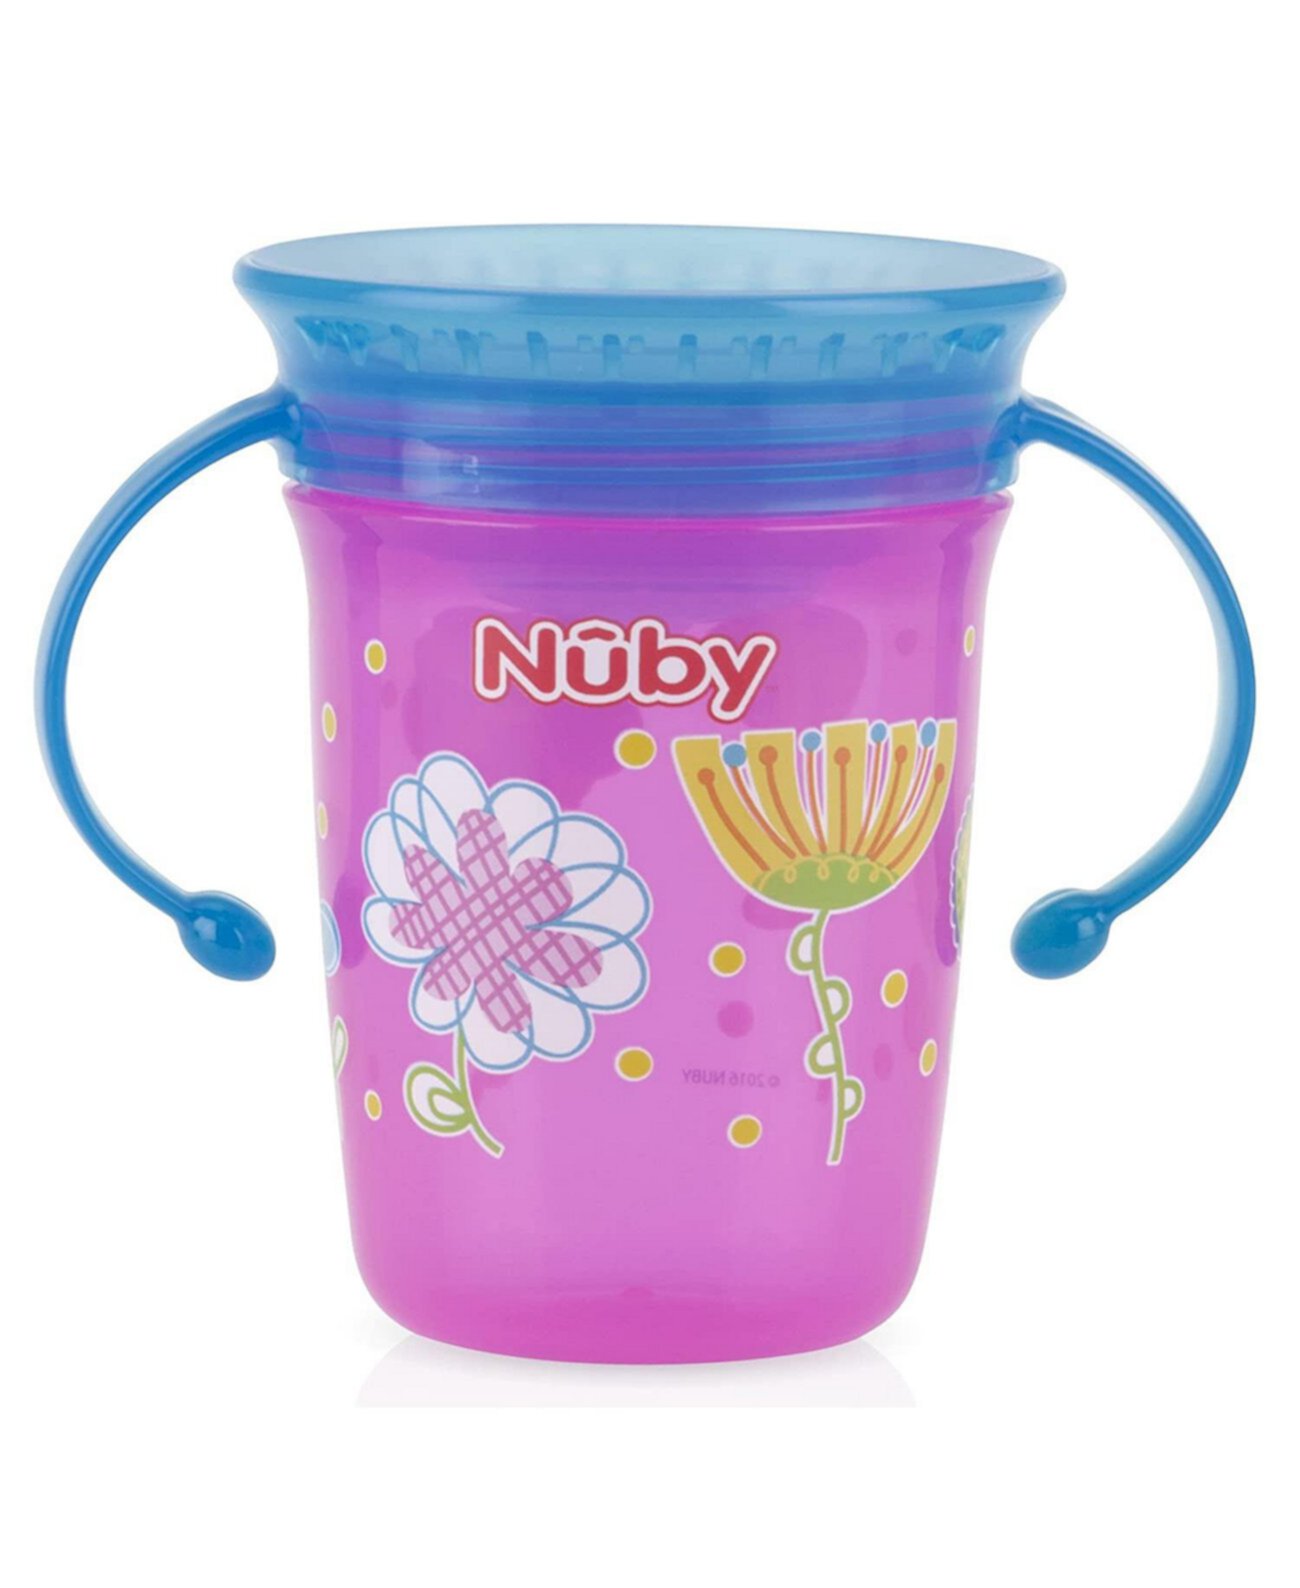 No Spill 2-Handle 360 Wonder Cup, Pink NUBY